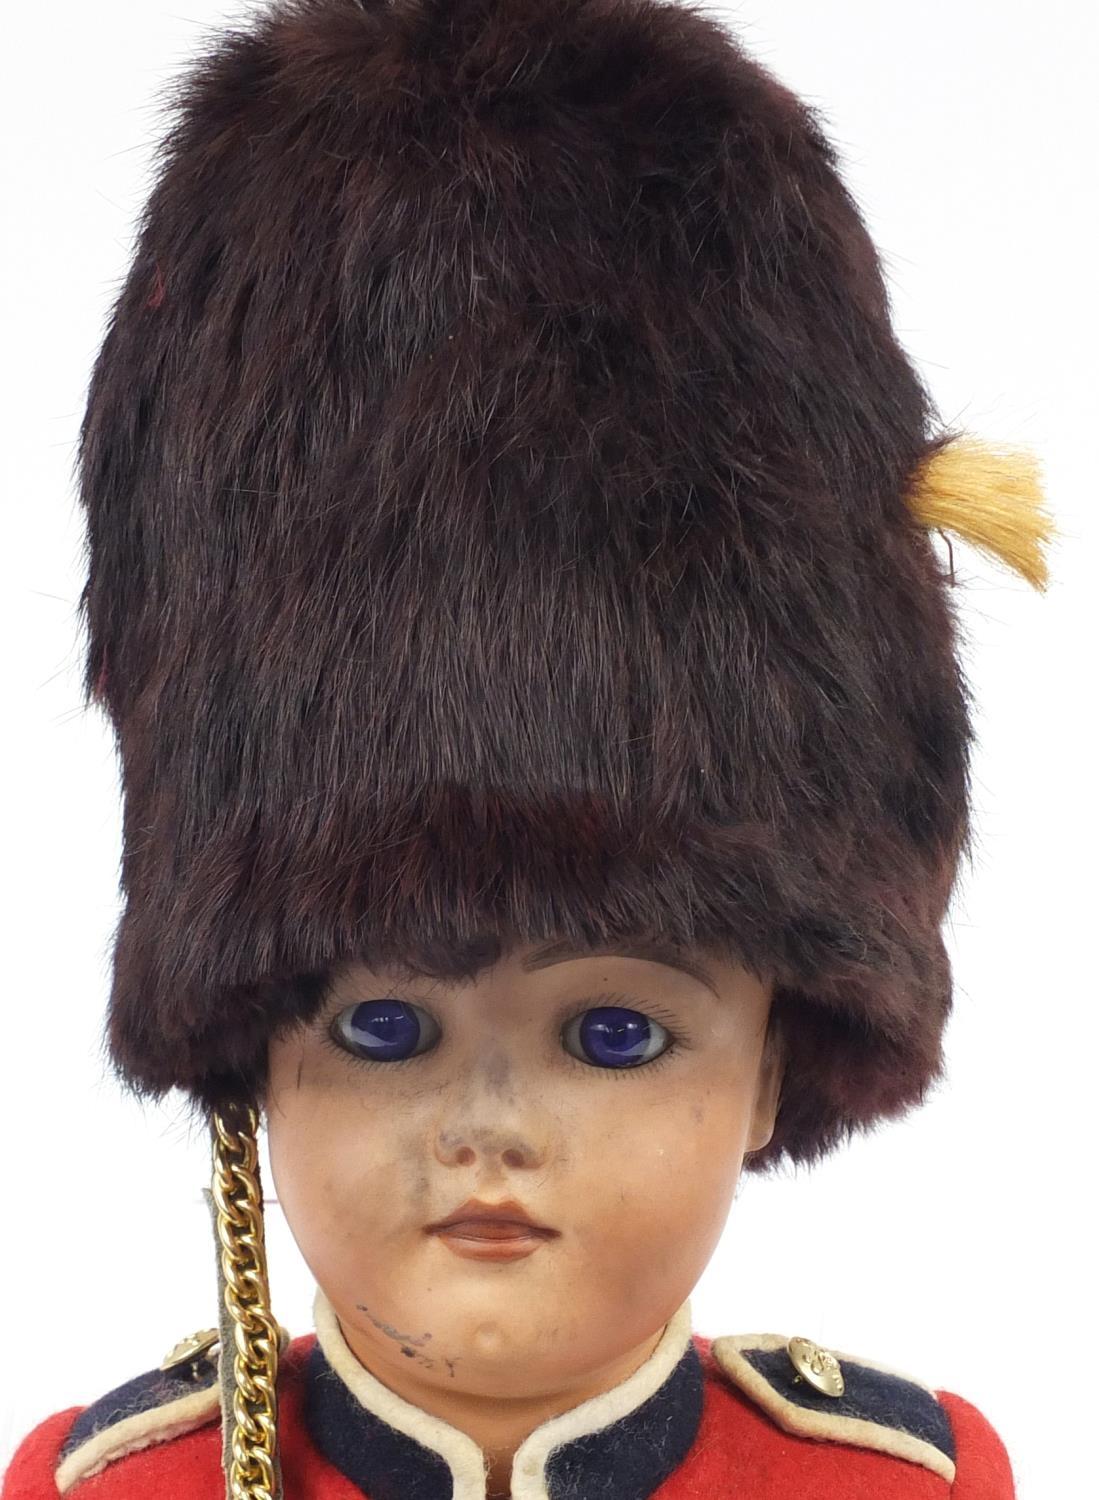 Simon & Halbig bisque headed Beefeater doll, 71cm high - Image 2 of 6